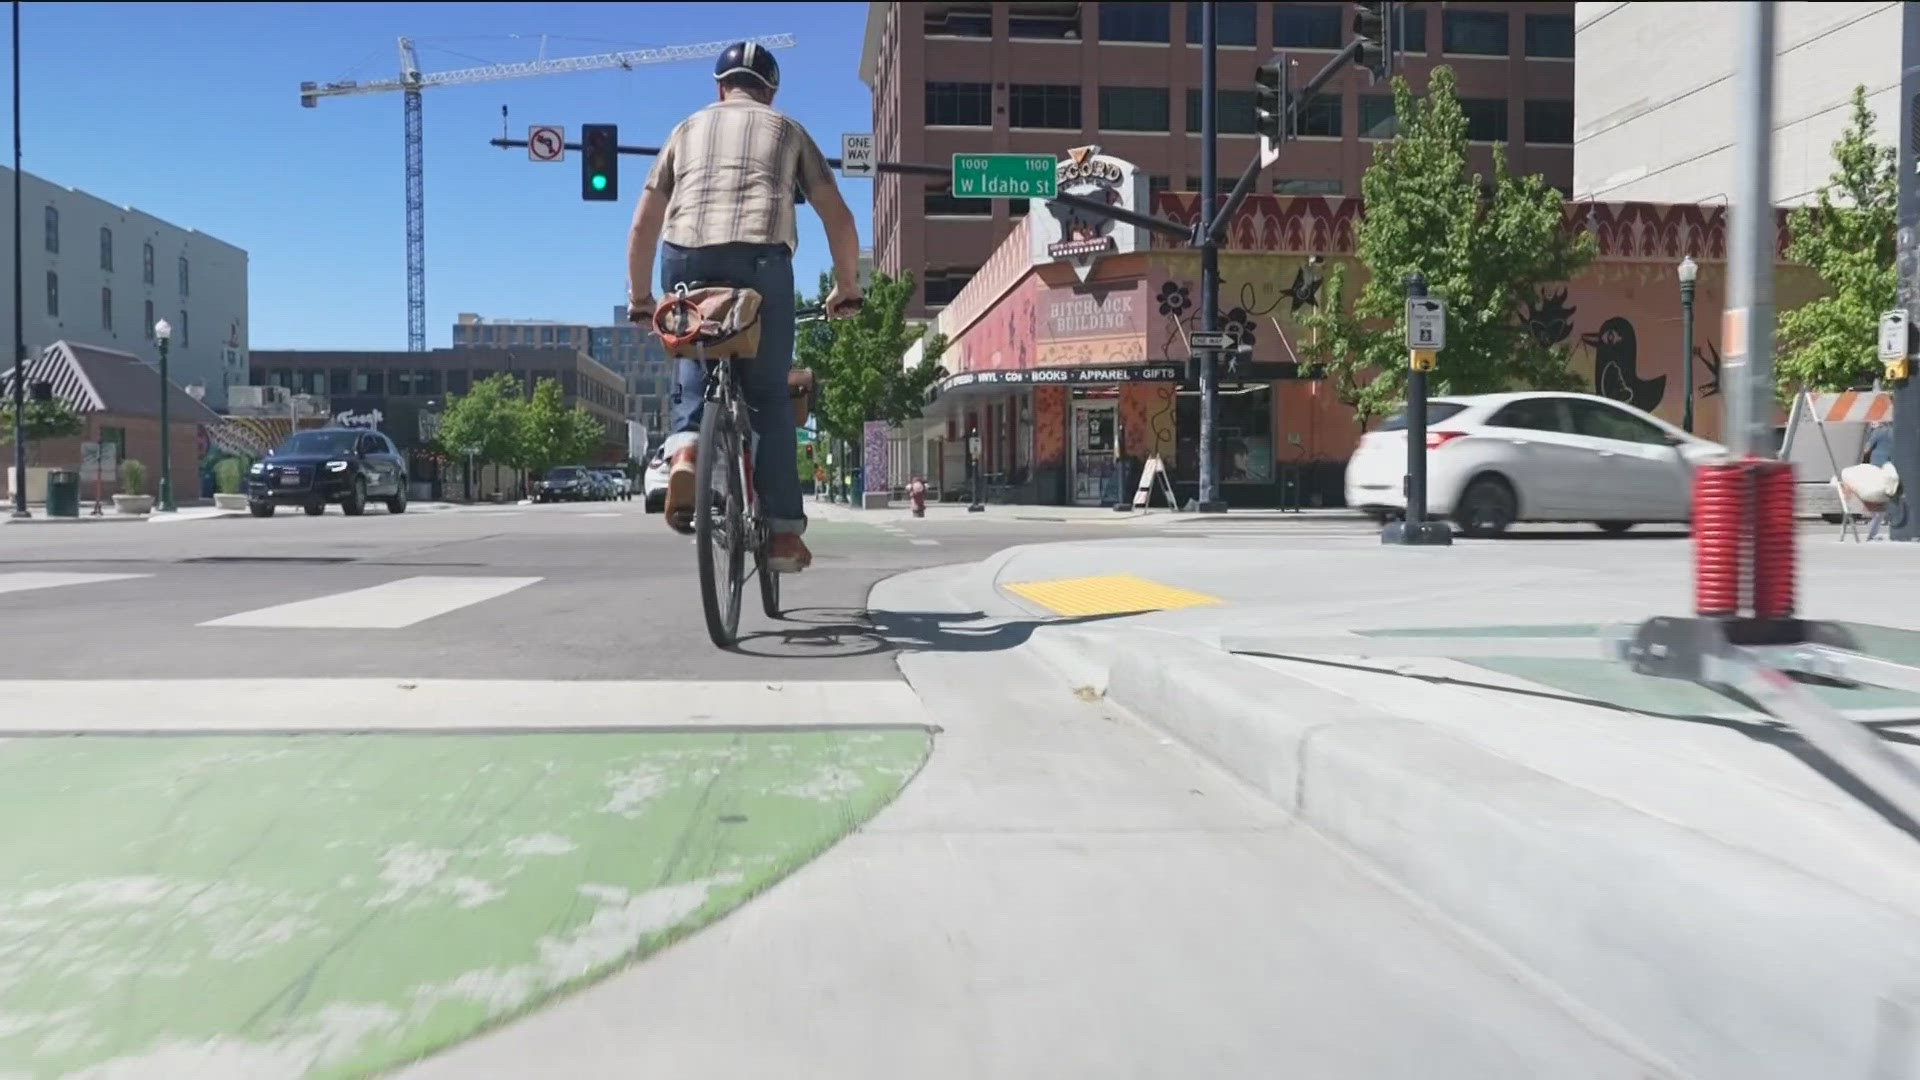 For National Bike to Work Day, KTVB photojournalist Jason foster did just that as we learn more about the purpose behind the day.